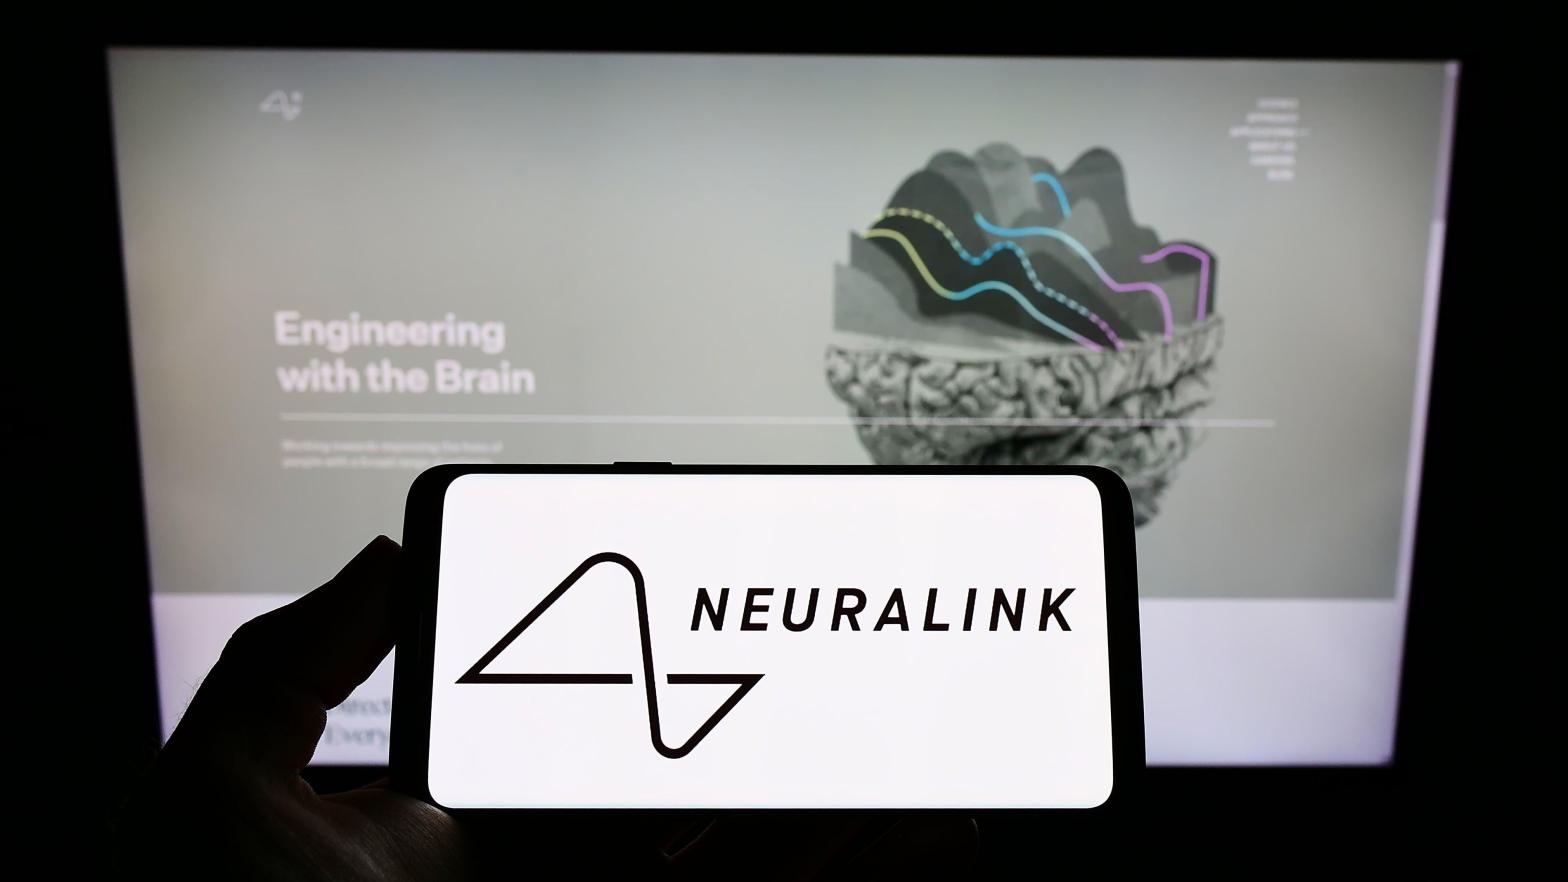 Neuralink updates have been thin after an April 2021 video showed a monkey with the implant playing Pong.  (Image: T. Schneider, Shutterstock)